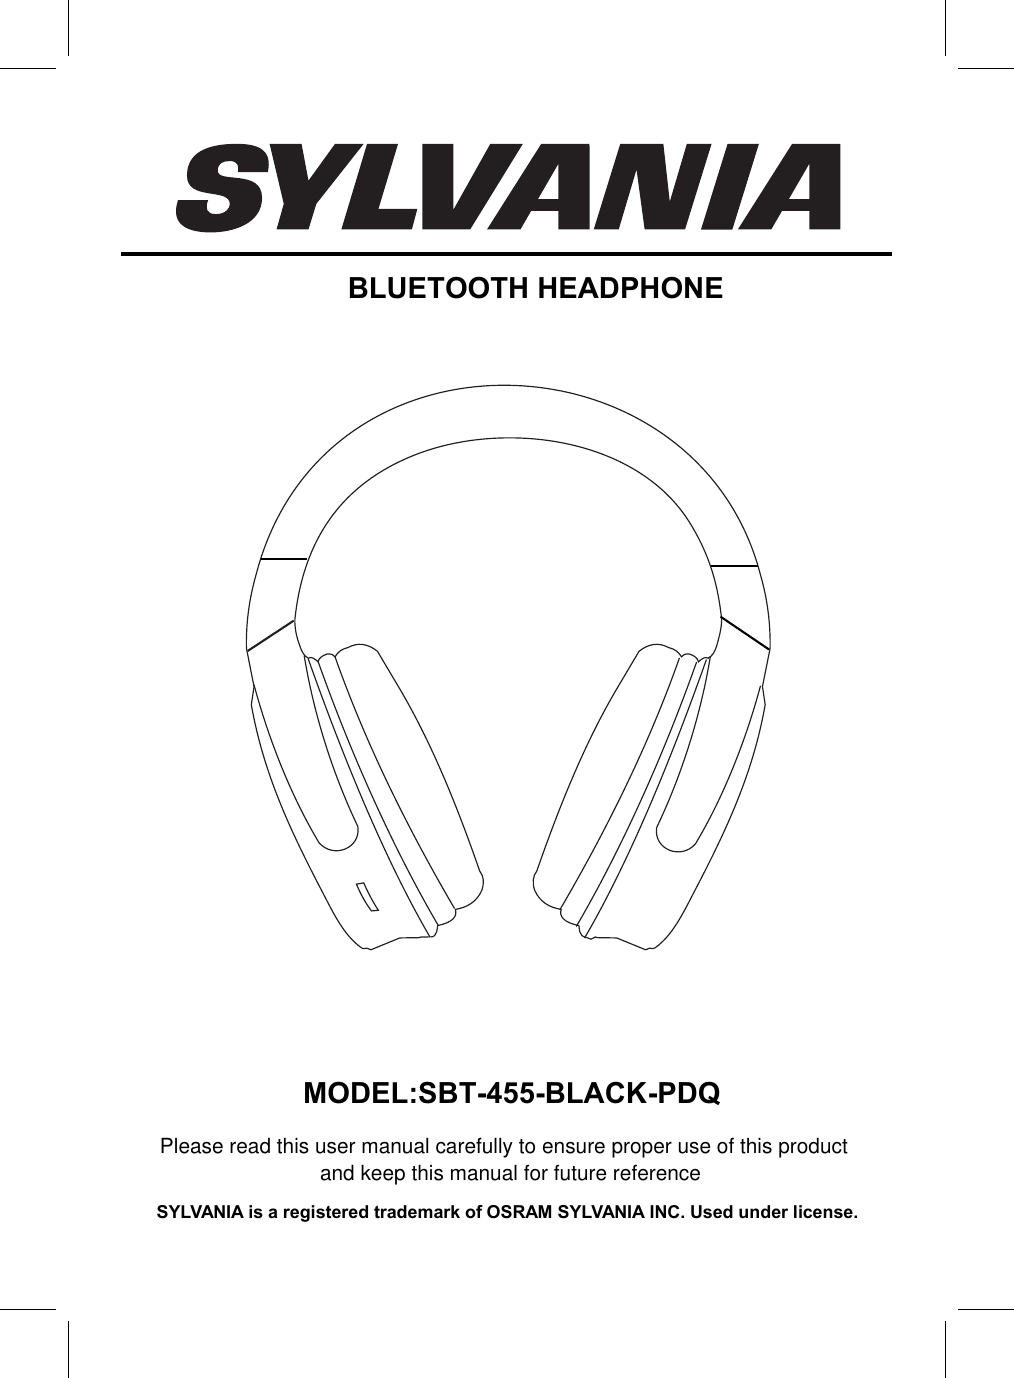 Please read this user manual carefully to ensure proper use of this productand keep this manual for future referenceSYLVANIA is a registered trademark of OSRAM SYLVANIA INC. Used under license.MODEL:SBT-455-BLACK-PDQBLUETOOTH HEADPHONE